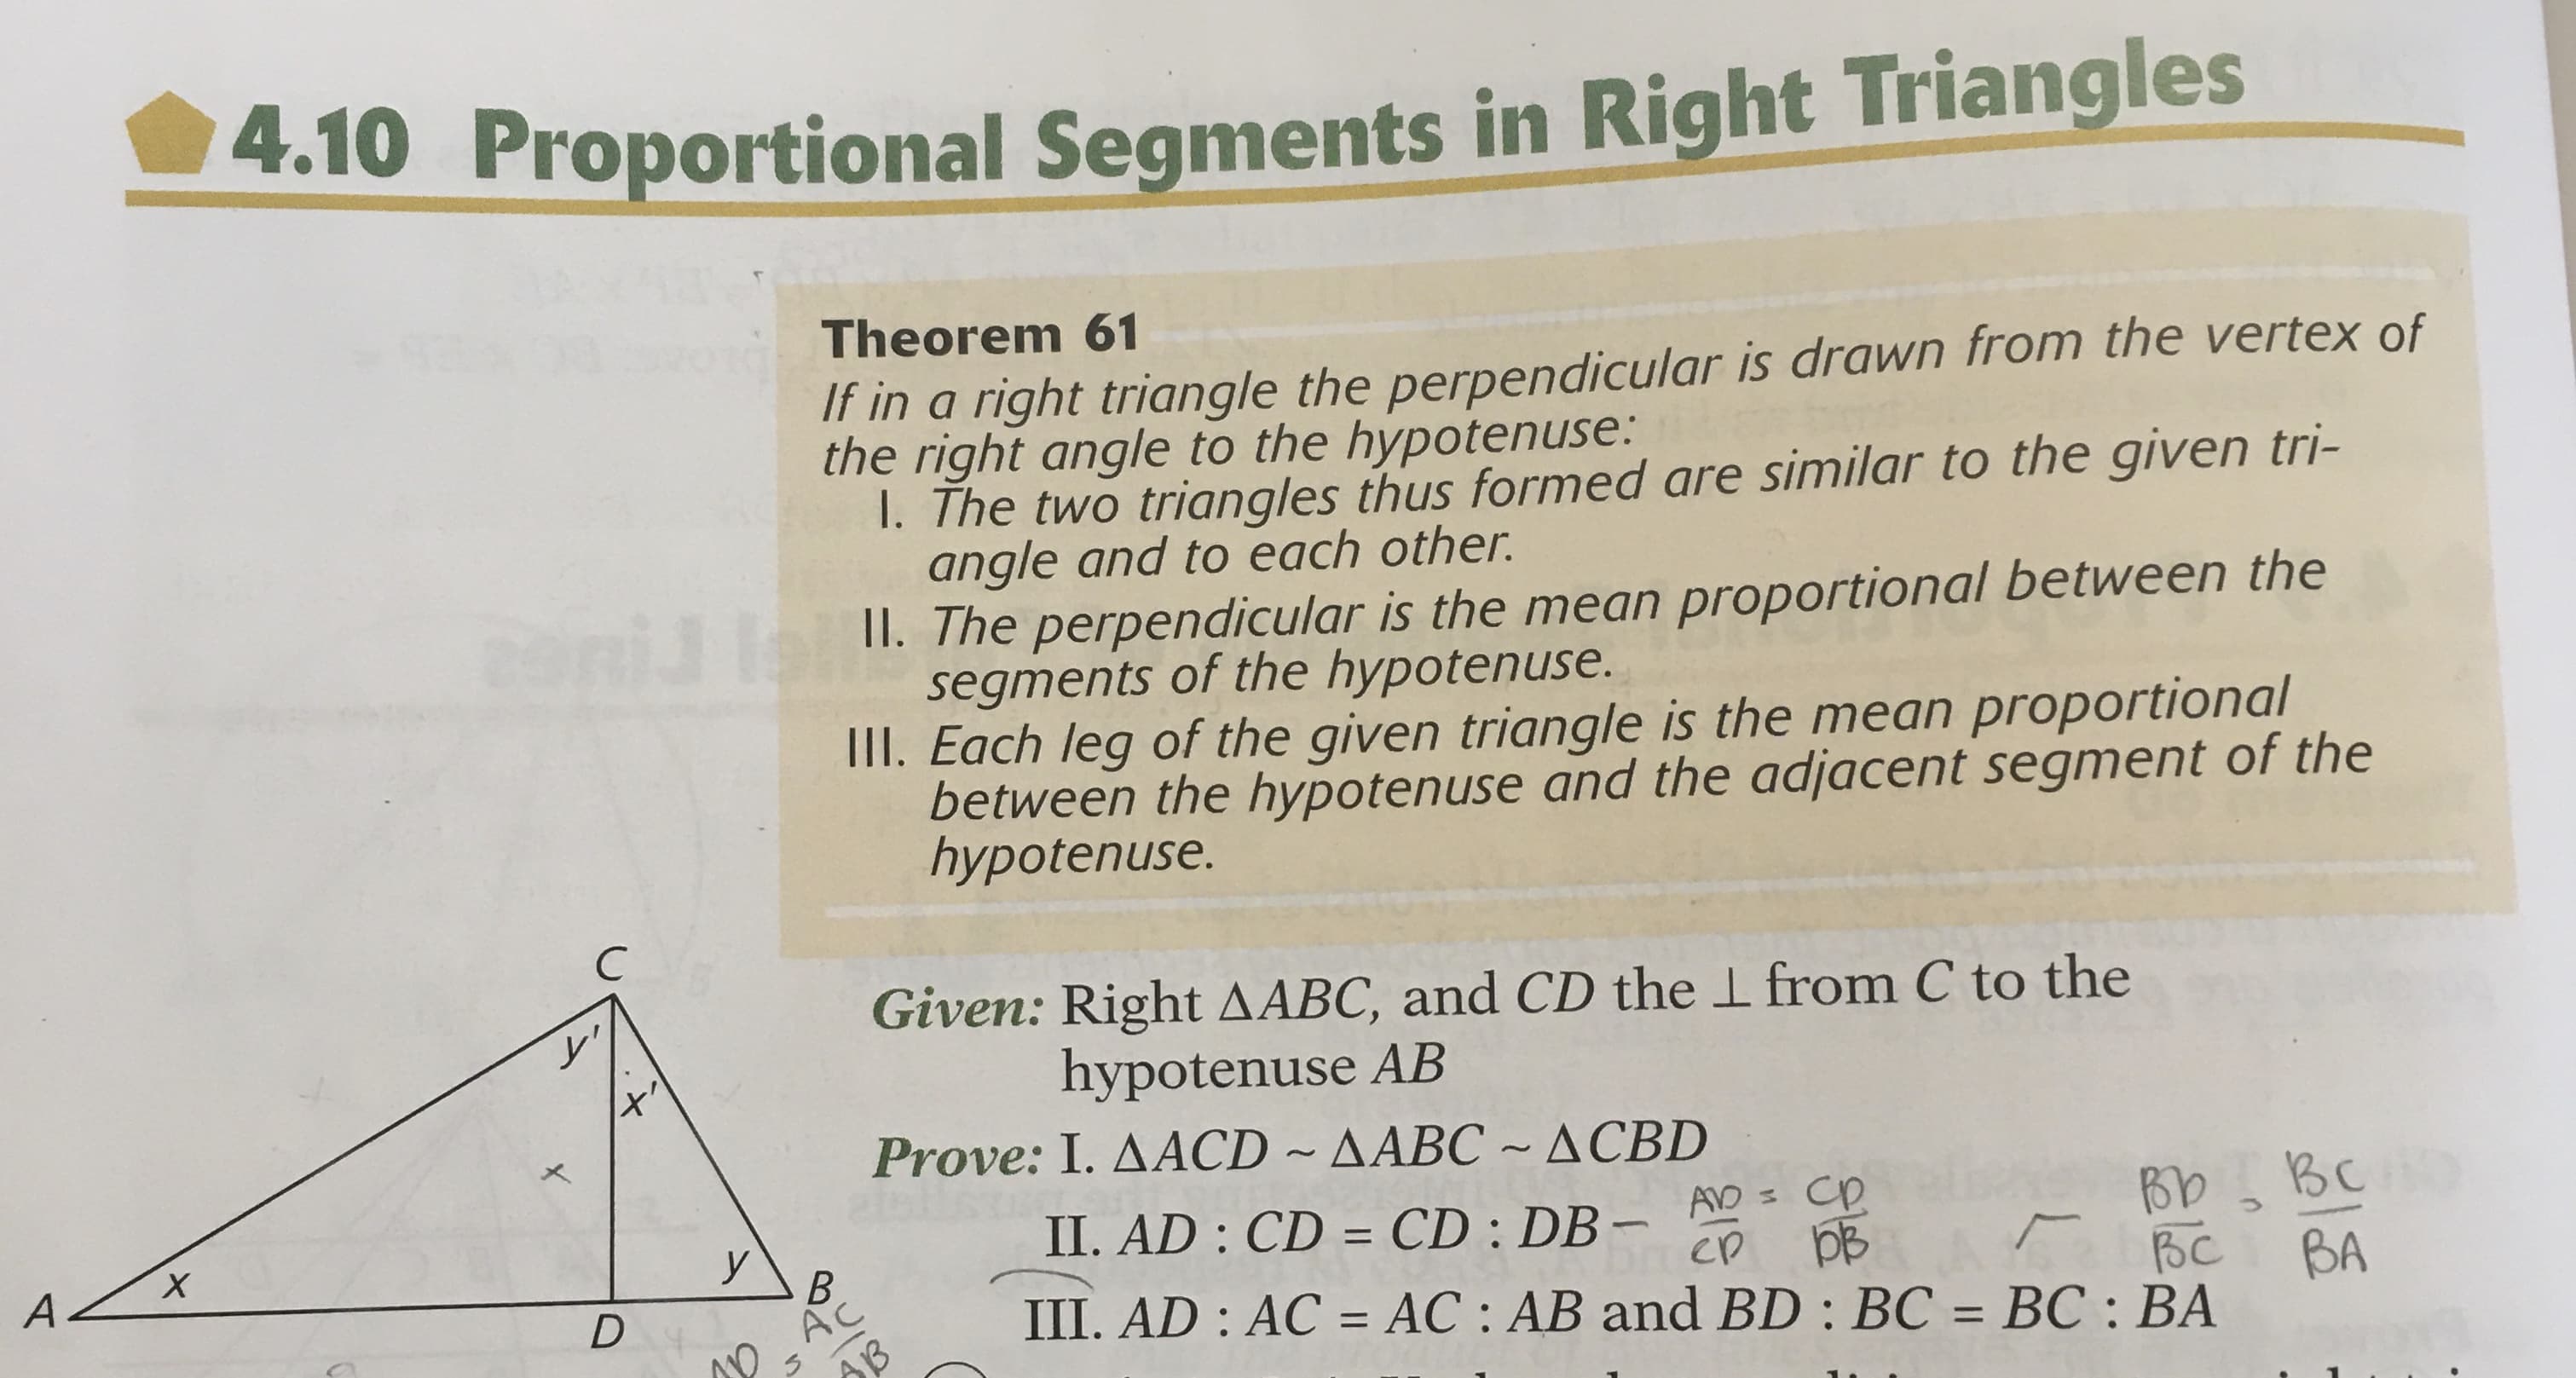 4.10 Proportional Segments in Right Triangles
Theorem 61
It in a right triangle the perpendicular is drawn from the vertex of
the right angle to the hypotenuse:
1. The two triangles thus formed are similar to the given tri-
angle and to each other.
II. The perpendicular is the mean proportional between the
segments of the hypotenuse.
II. Each leg of the given triangle is the mean proportional
between the hypotenuse and the adjacent segment of the
hypotenuse.
Given: Right AABC, and CD the I from C to the
hypotenuse AB
Prove: I. AACD ~ AABC ~ ACBD
II. AD : CD = CD : DB –
AD = CD
Bb BC
BA
%3D
B.
AC
DB
ep
вс
III. AD : AC = AC : AB and BD : BC = BC : BA
ло
%3D
AB
%3D
